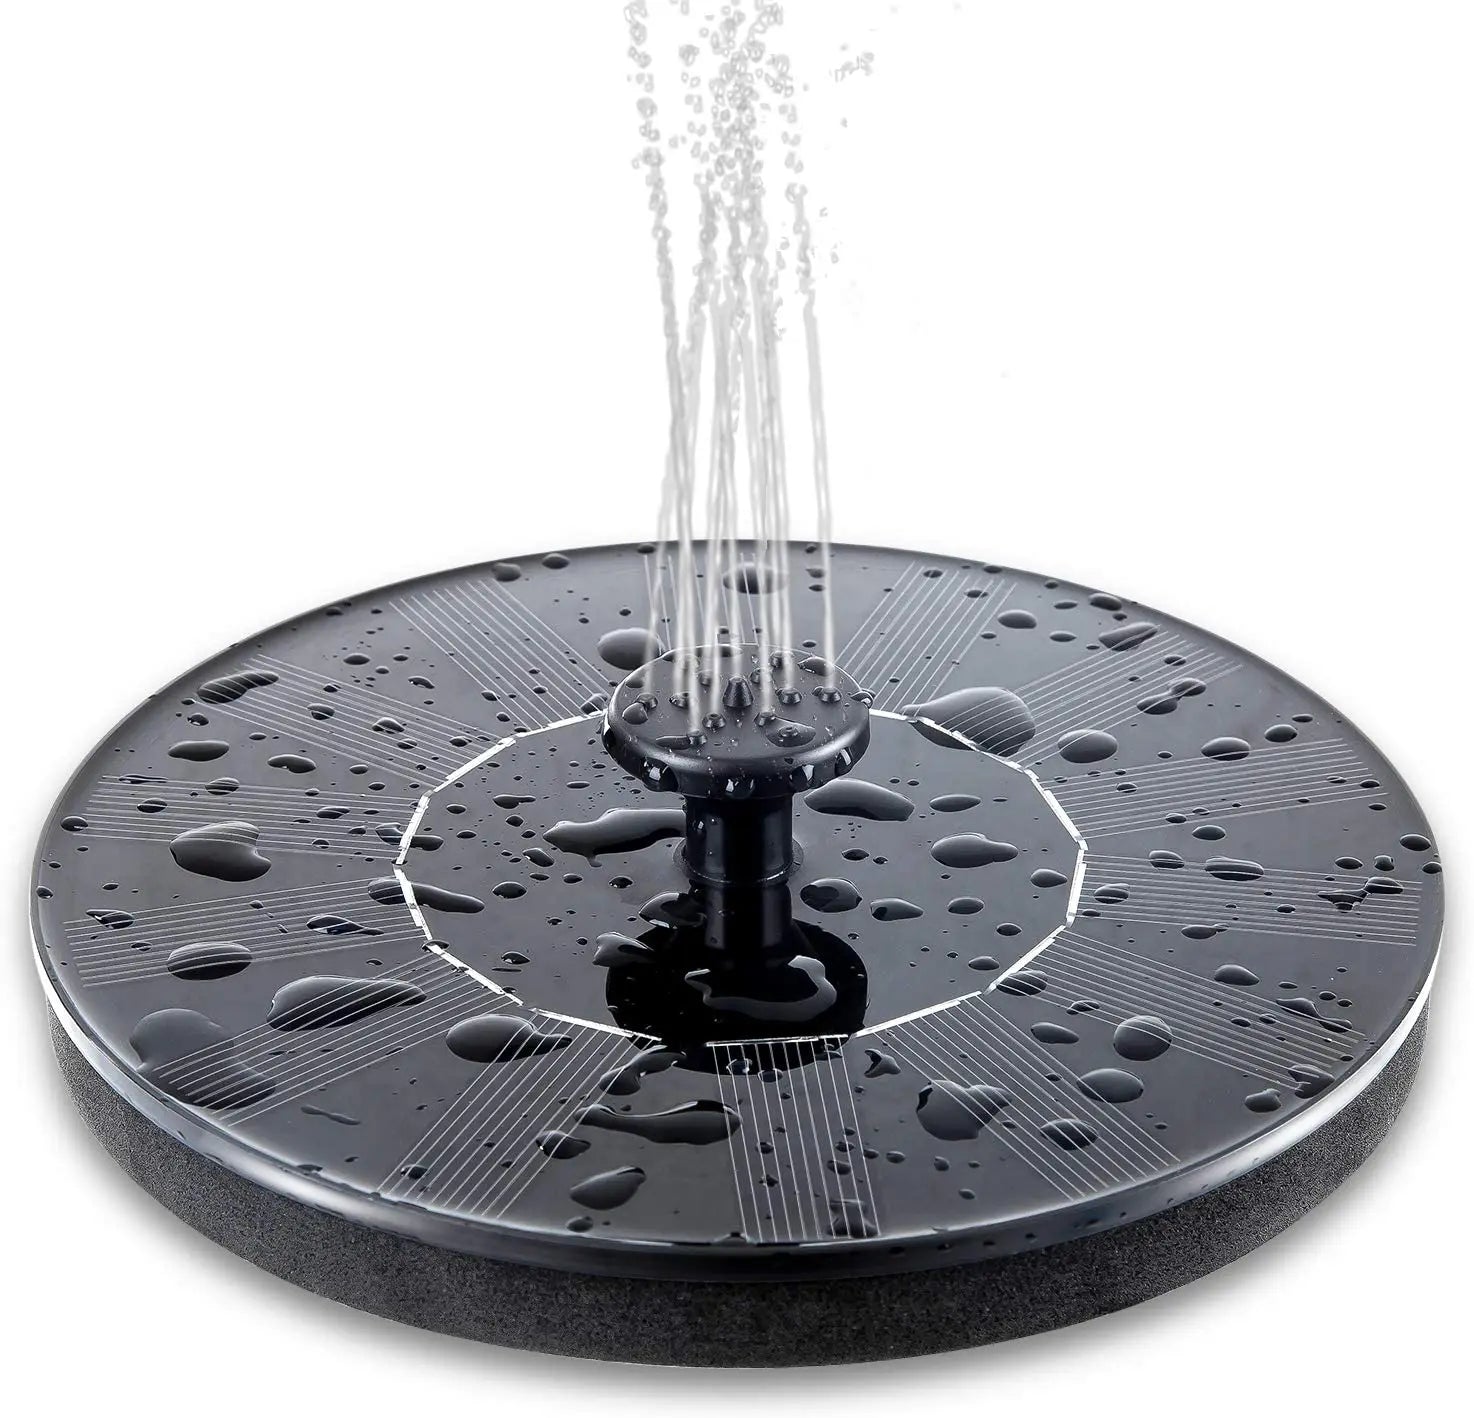 Floating Solar Fountain, Small dimension measuring device, approximately 38.26 square inches and 8.4 oz.